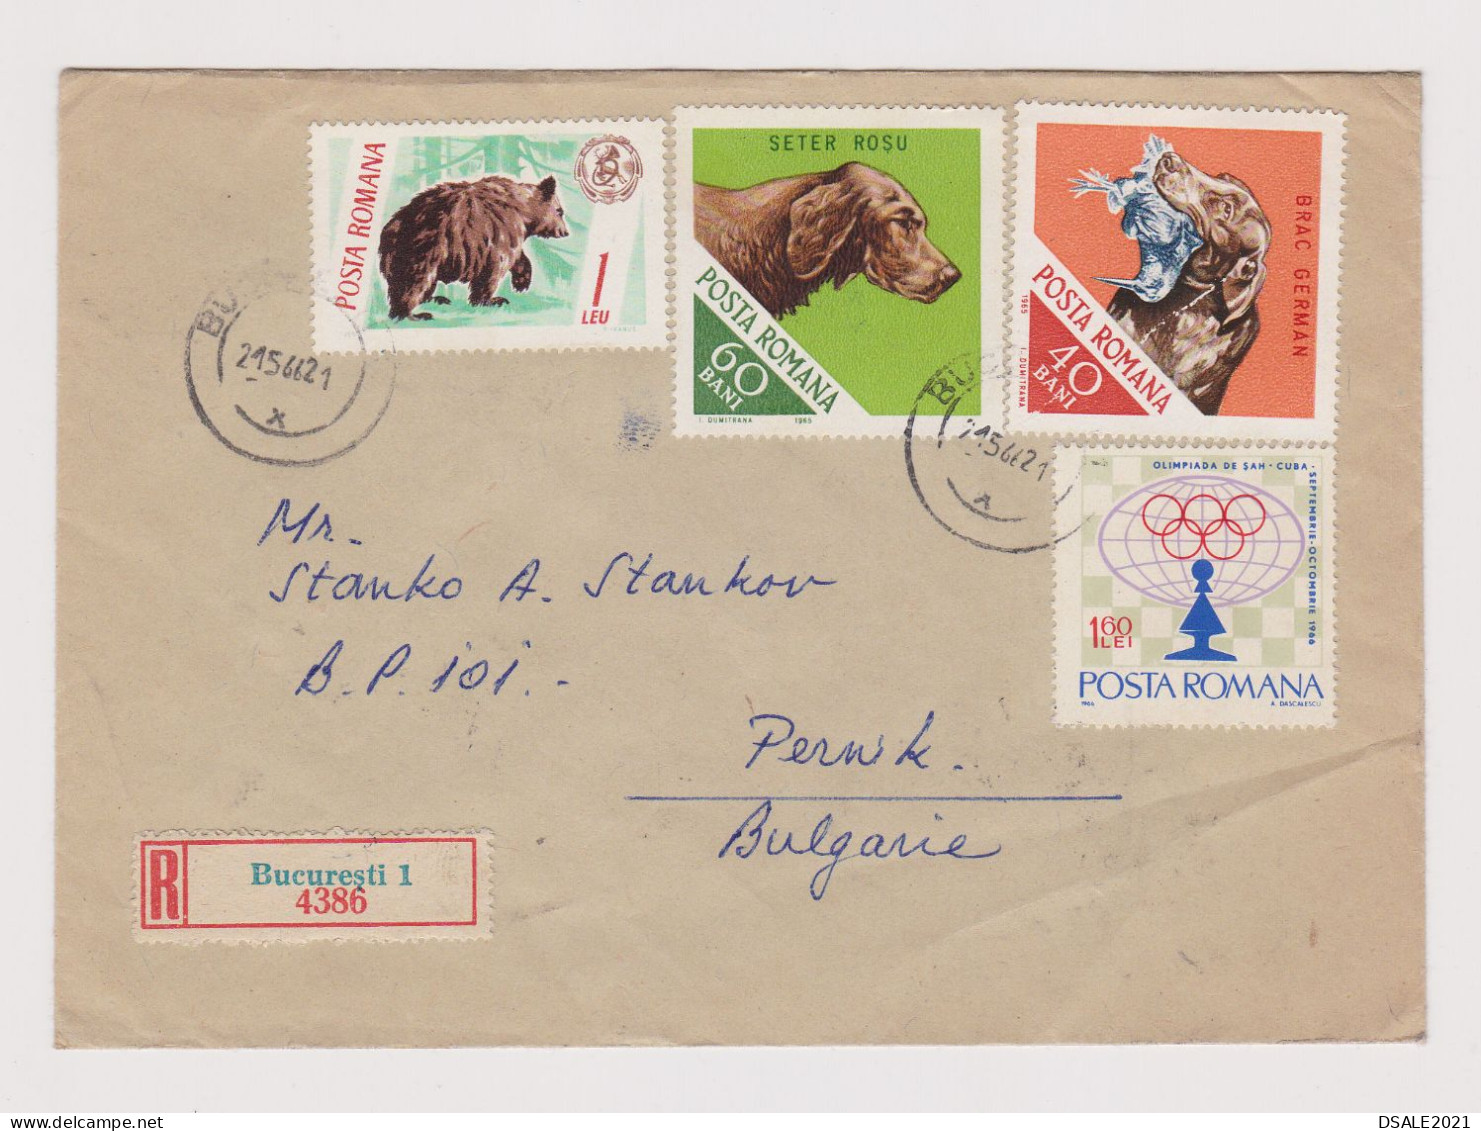 Romania Rumänien 1960s Registered Cover With Topic Stamps Bear, Hunting Dogs, Dog, Chess, Sent To Bulgaria (933) - Lettres & Documents